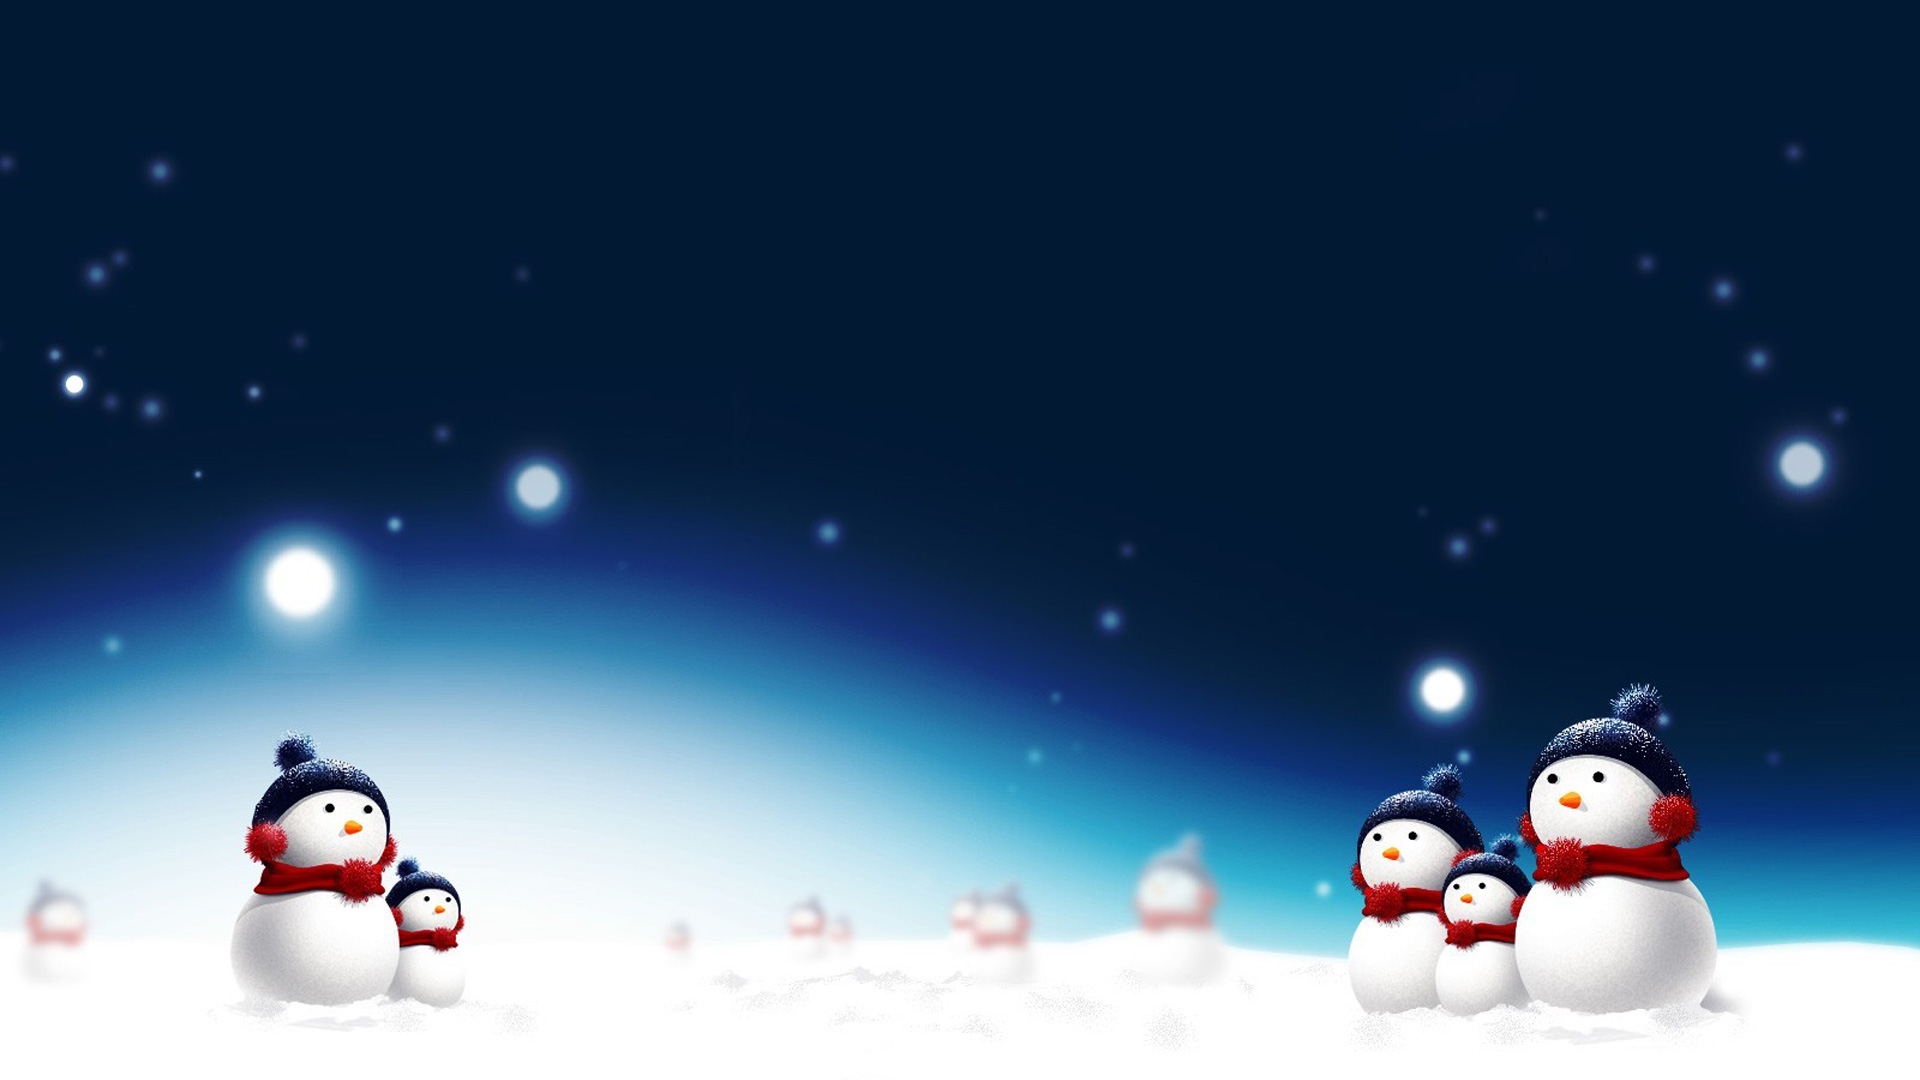 Wallpaper - Moving Animated Christmas Background - HD Wallpaper 